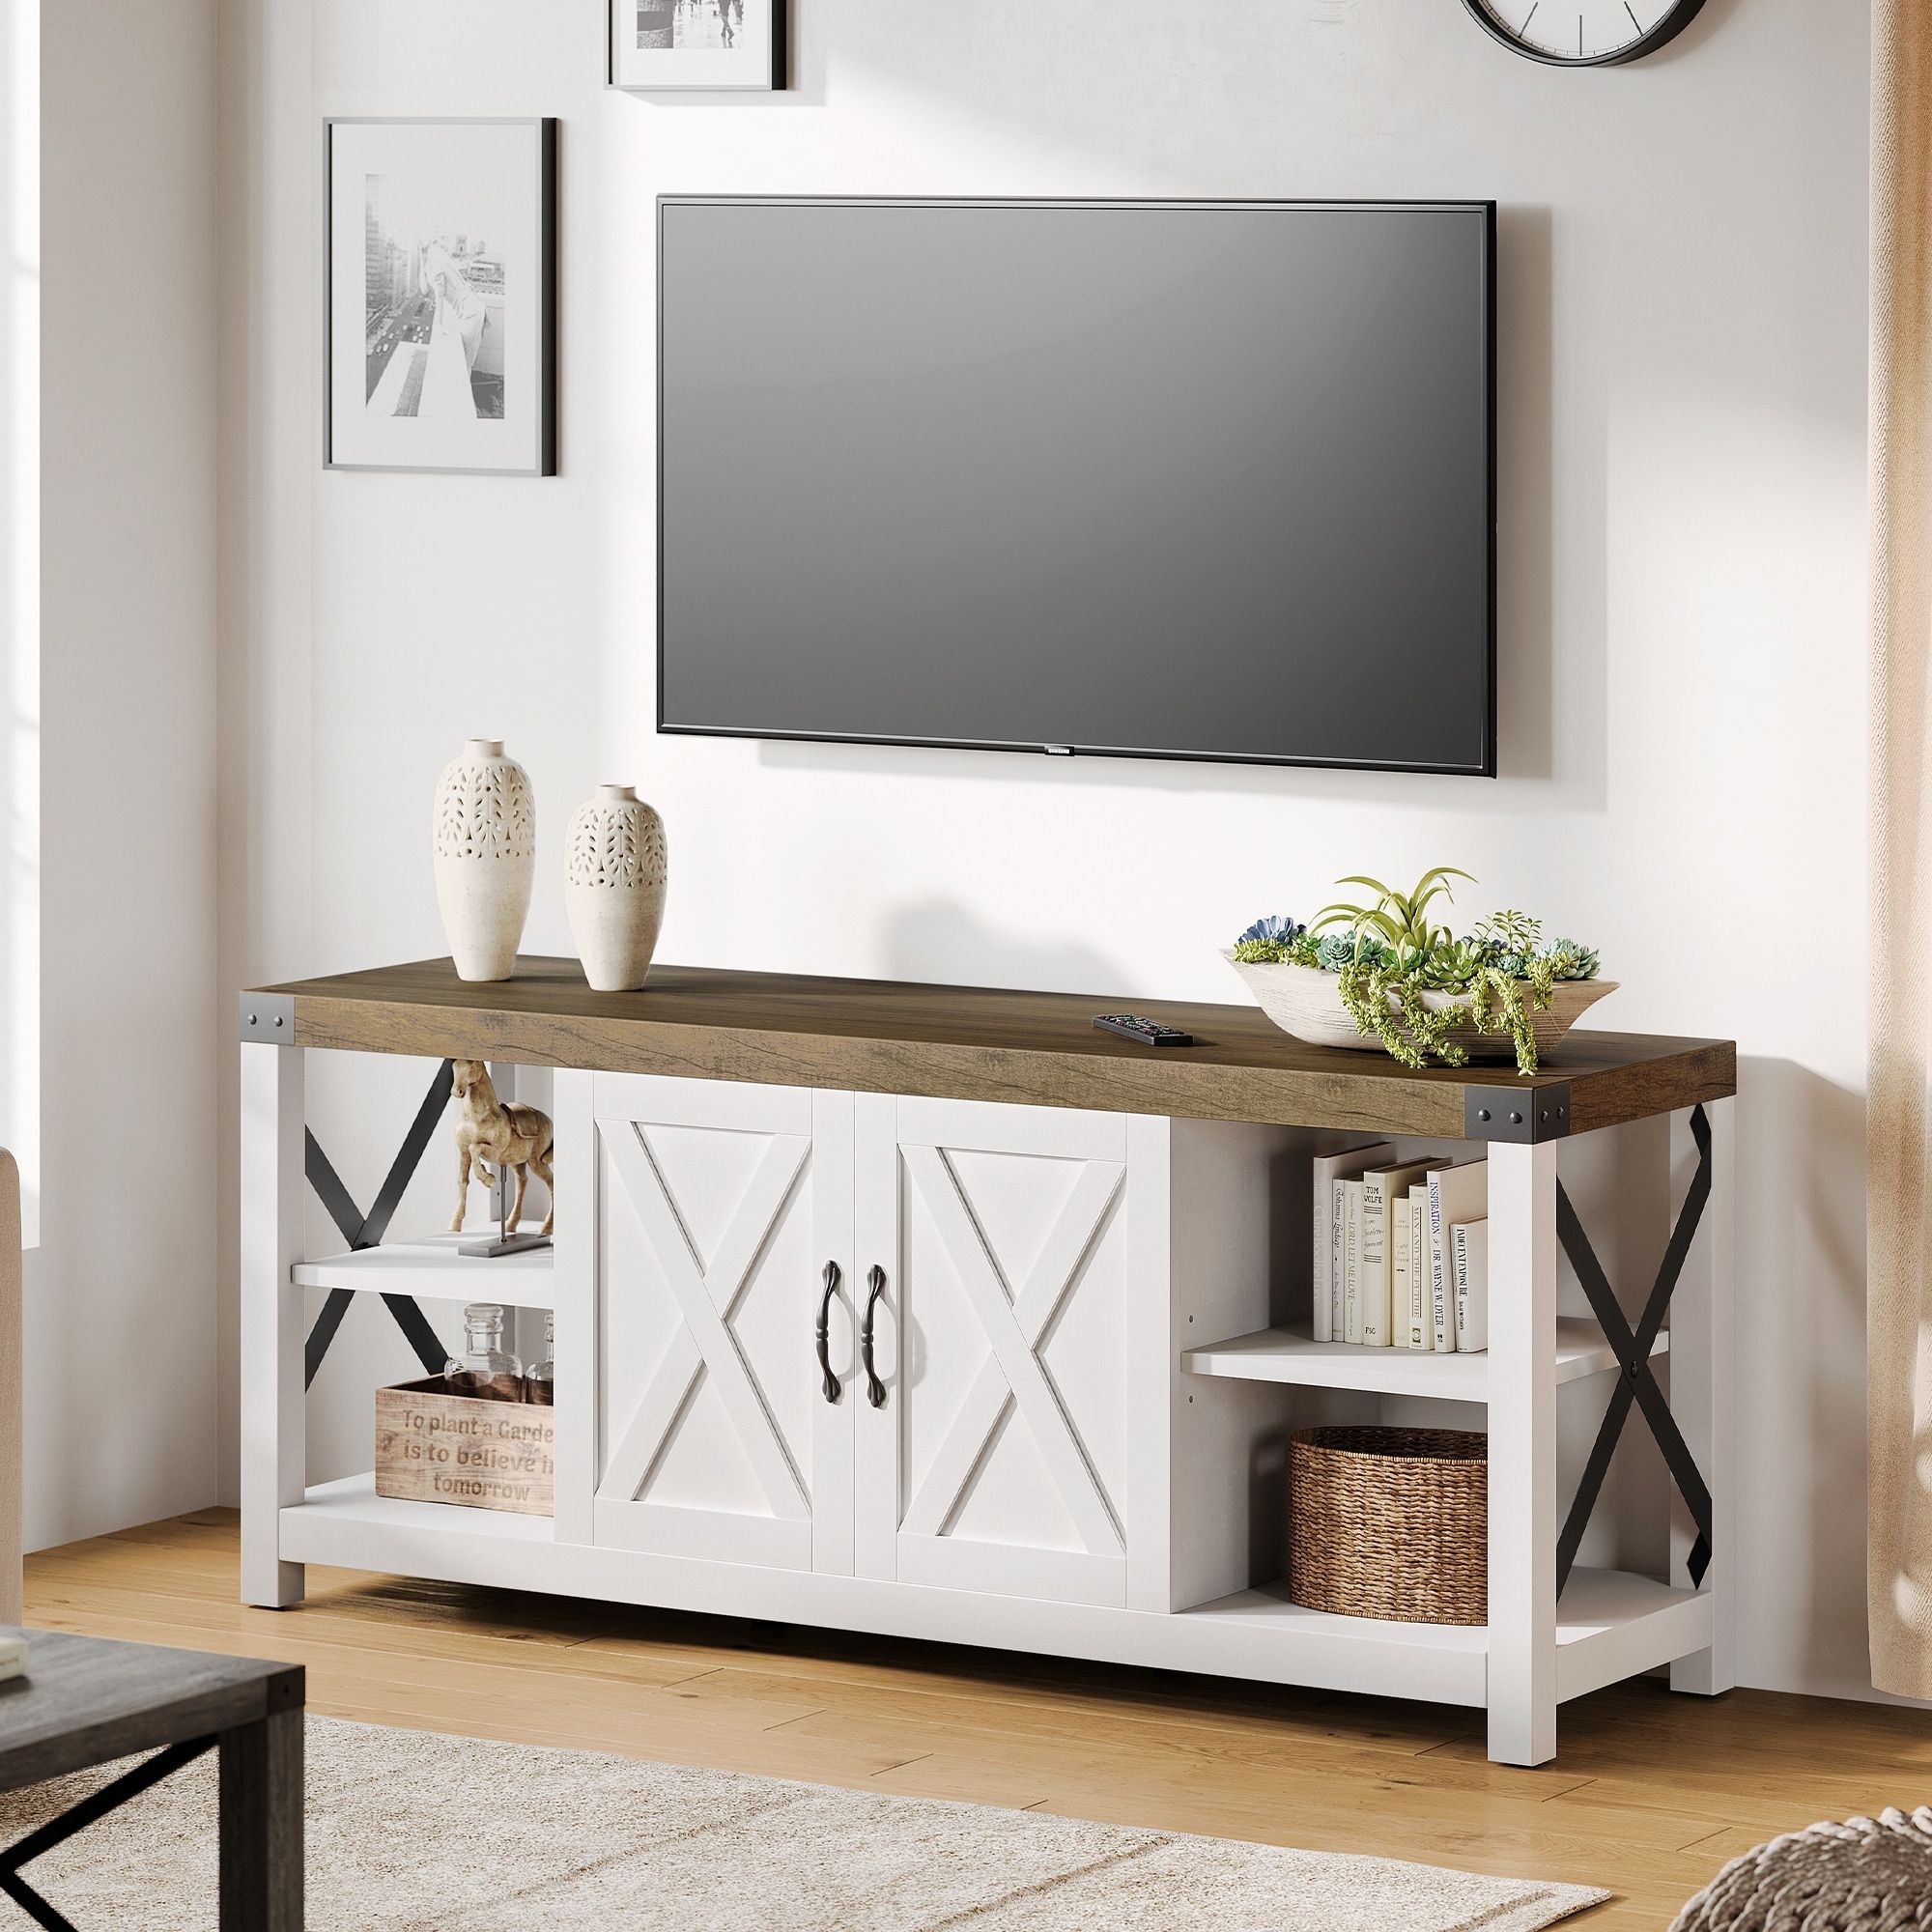 59 Inch Tv Stand For Tv Up To 50 60 65 Inches, Farmhouse Wood Tv Cabinet  Entertainment Center – 59" – On Sale – Bed Bath & Beyond – 36742172 Pertaining To Farmhouse Stands For Tvs (Photo 10 of 15)